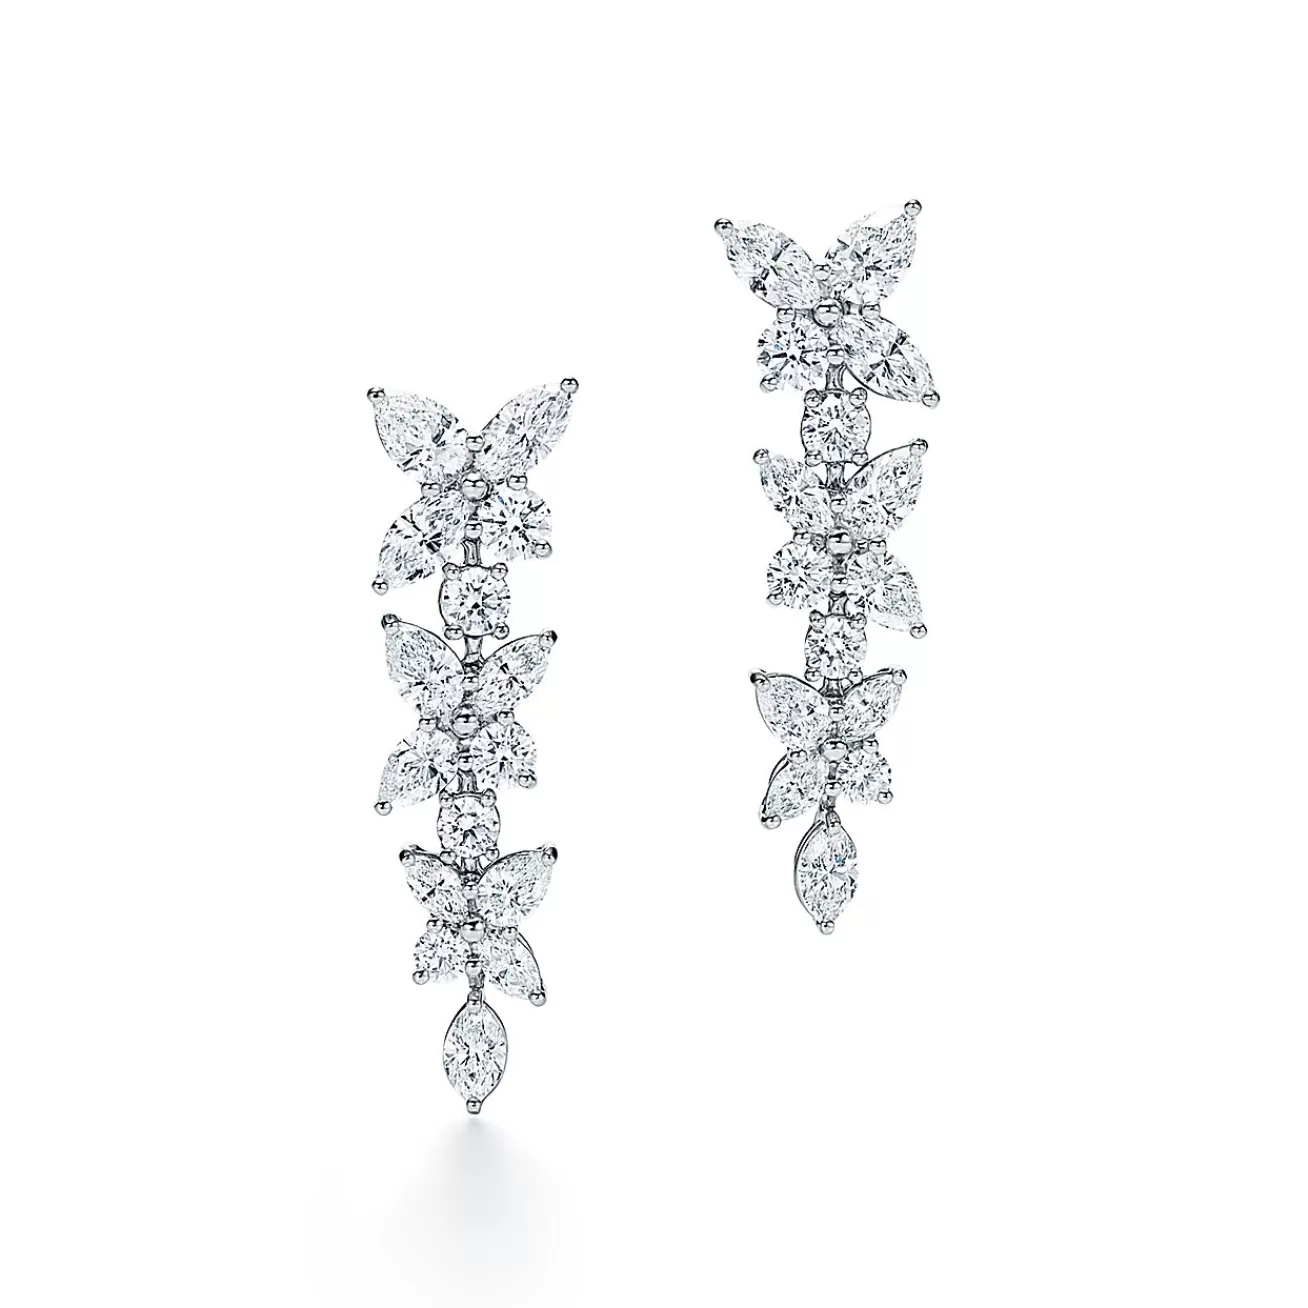 Tiffany & Co. Tiffany Victoria® mixed cluster drop earrings in platinum with diamonds. | ^ Earrings | Platinum Jewelry